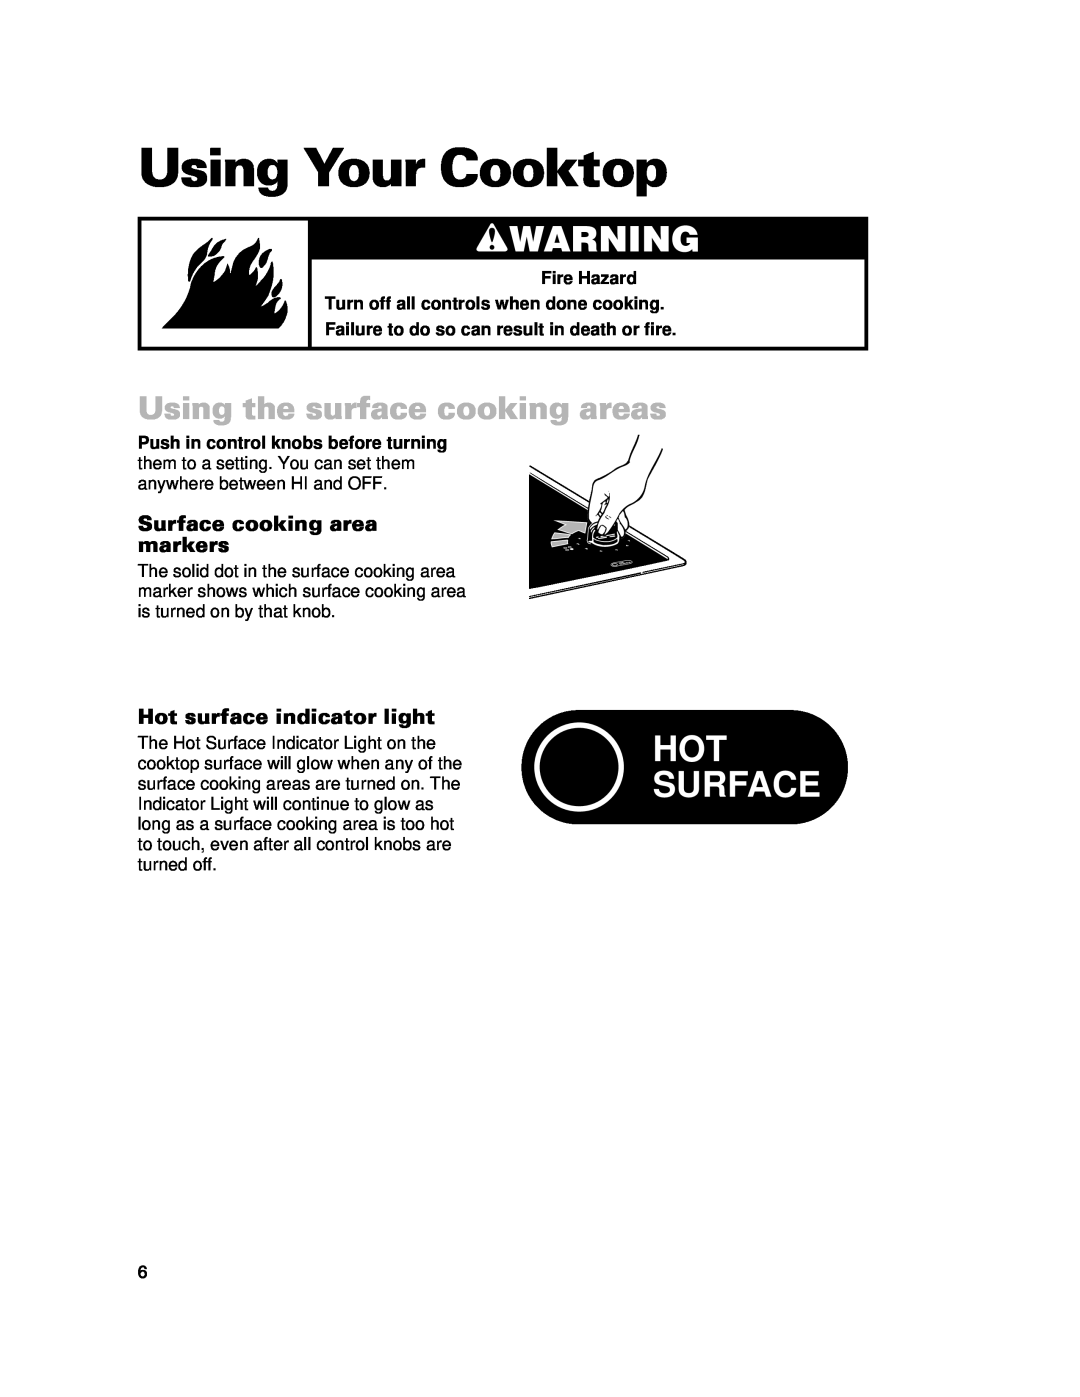 Whirlpool RCC3024G Using Your Cooktop, wWARNING, Hot Surface, Using the surface cooking areas, Hot surface indicator light 